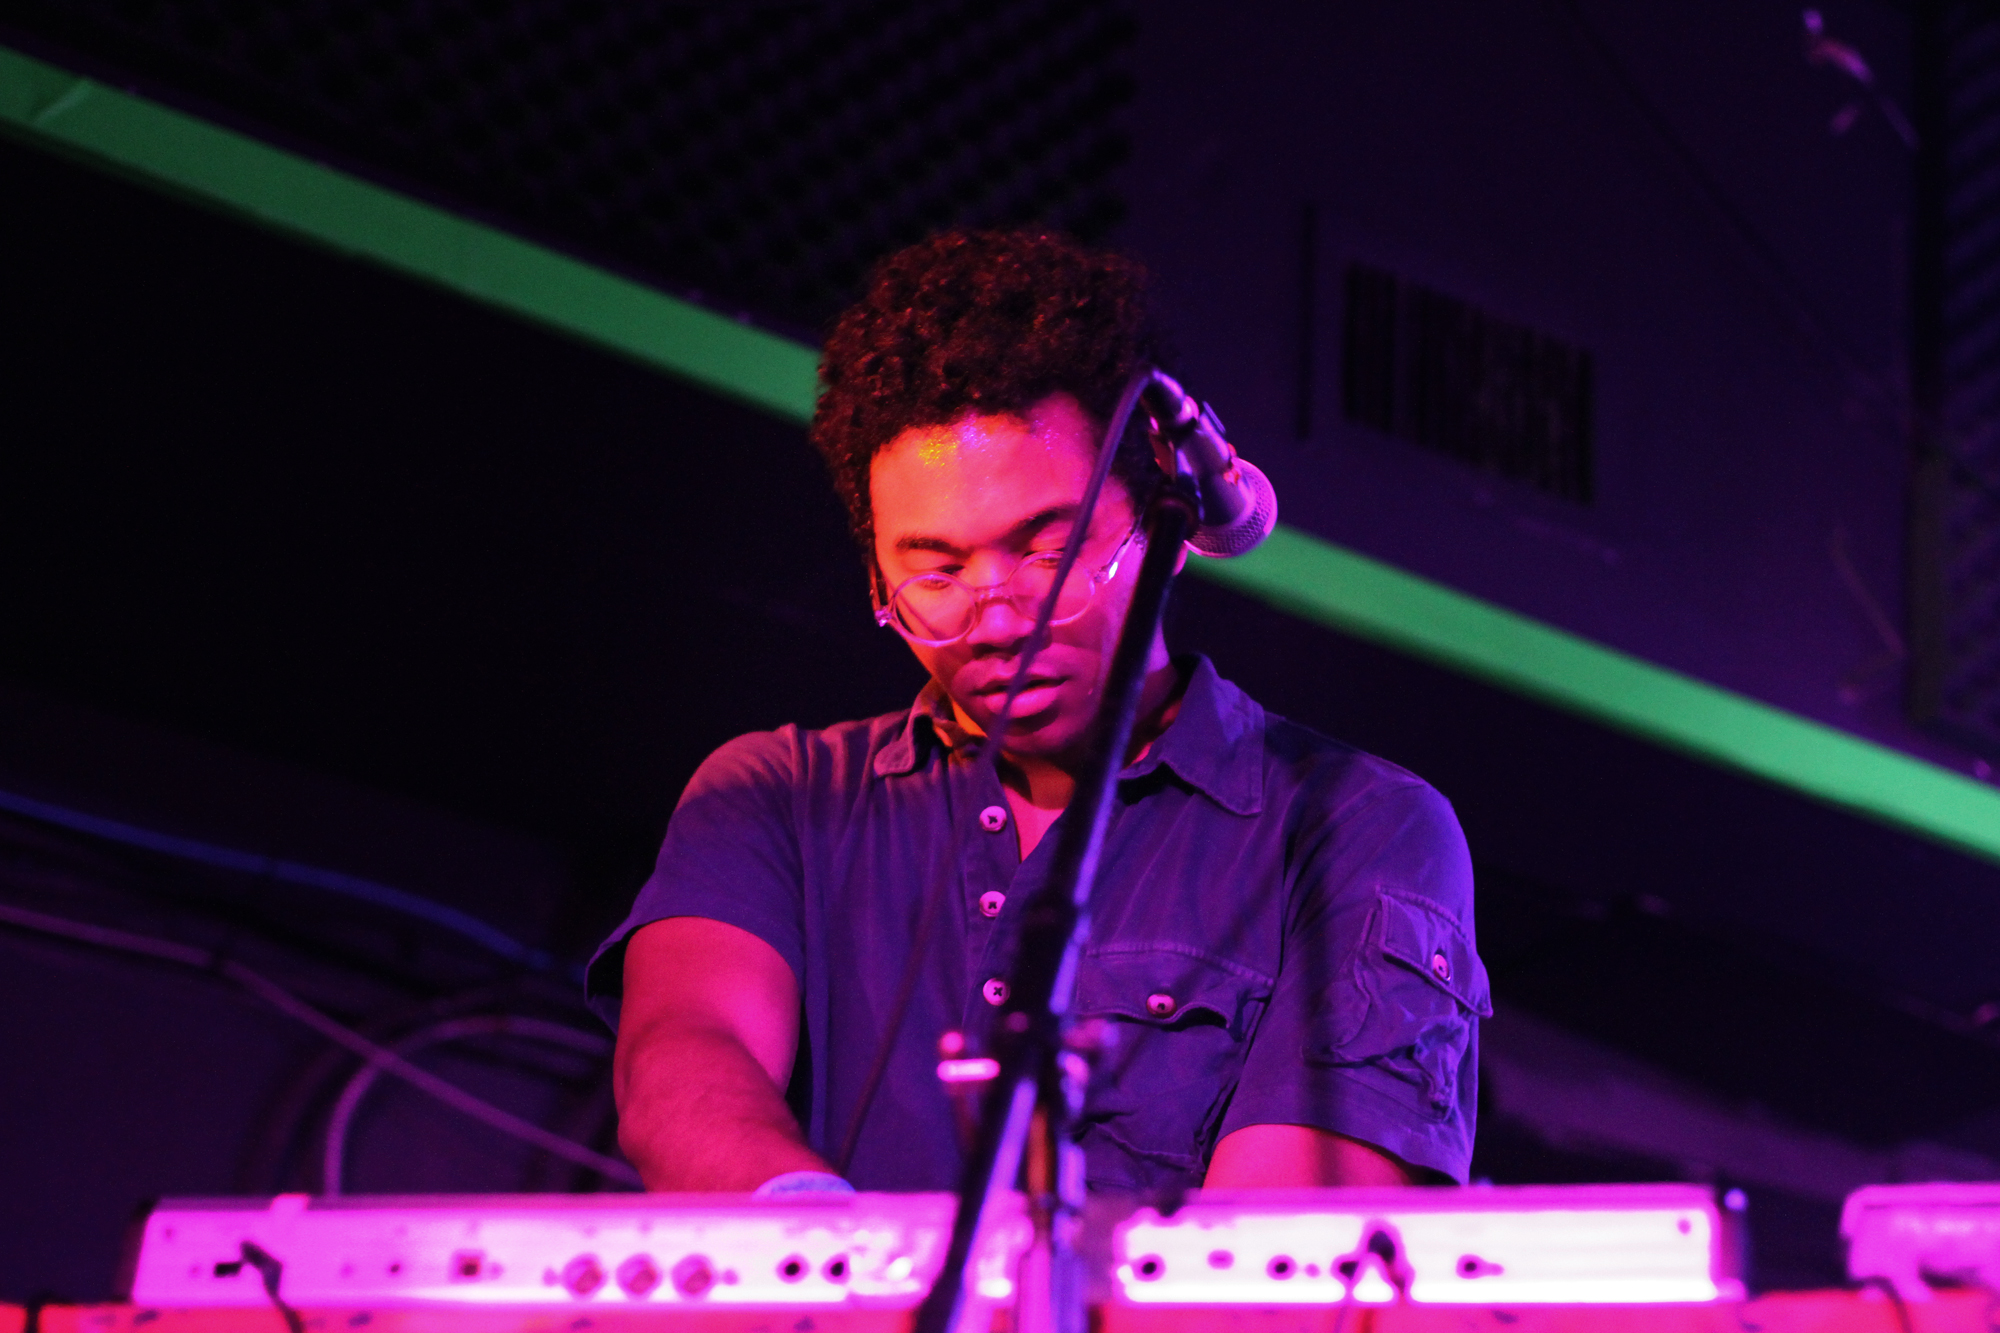 Toro y Moi performs at Rock and Roll Hotel in Washington, D.C. on Apr. 14, 2011.